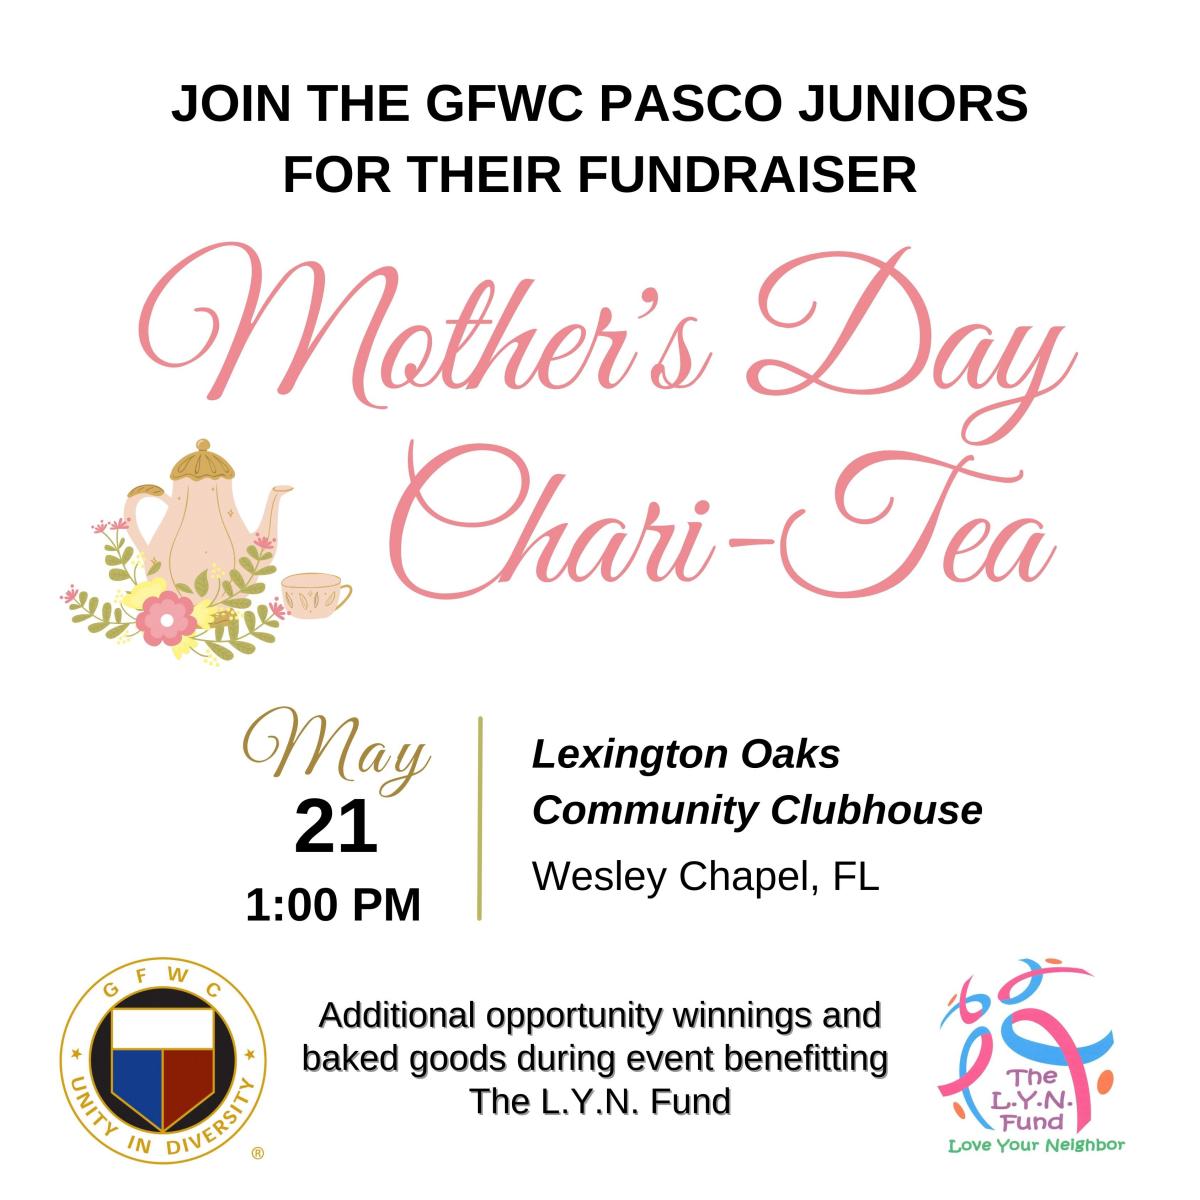 Mother's Day Chari-Tea Fundraiser cover image